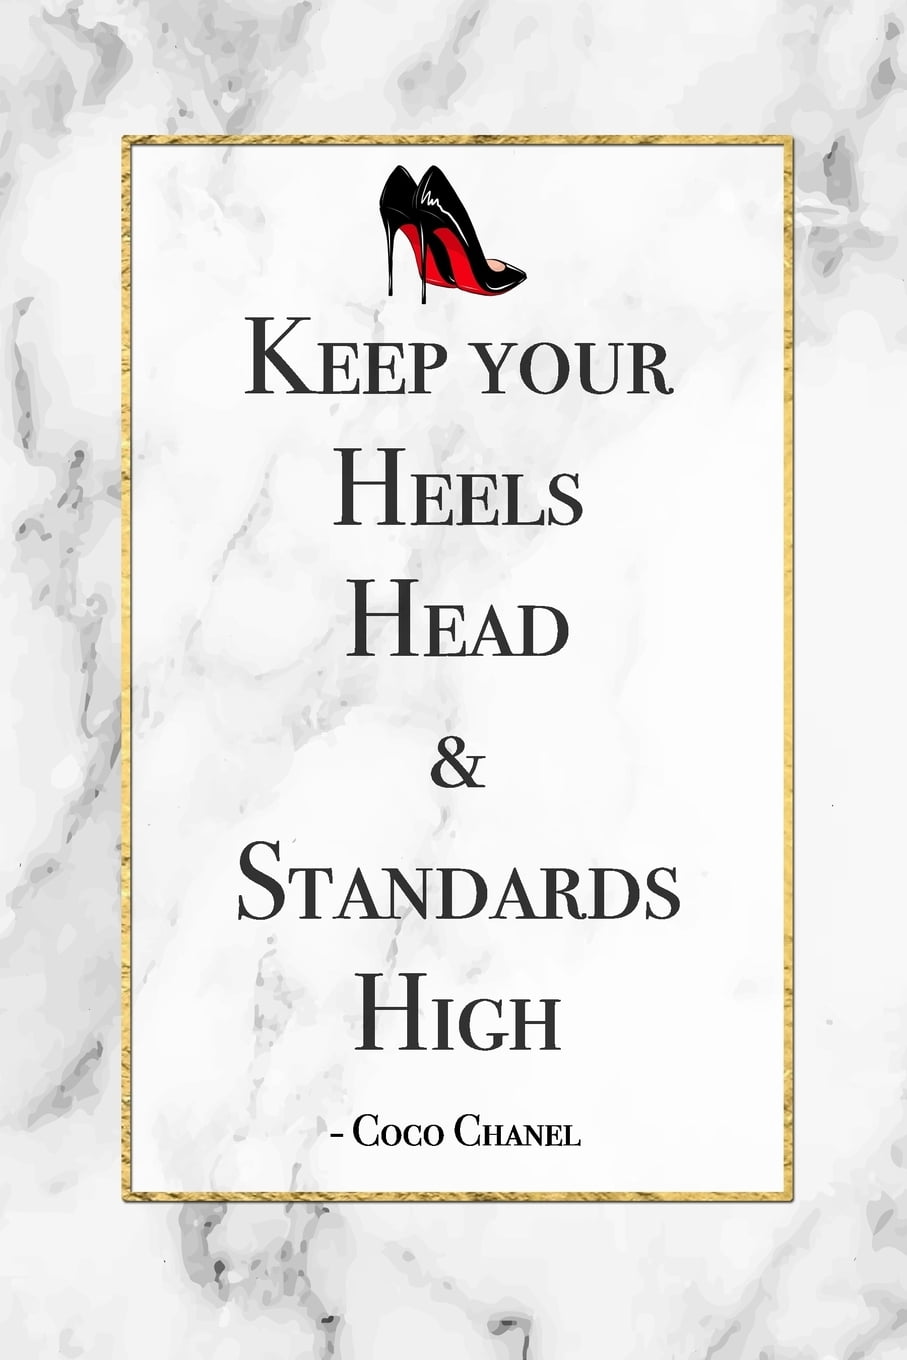 Andaz Press Motivational Square Coffee Drink Coasters Gift,  She Believed She Could so She Did, Keep Your Heels, Head & Standards High,  Coco Chanel, 4-Pack, Birthday Christmas Gifts: Coasters